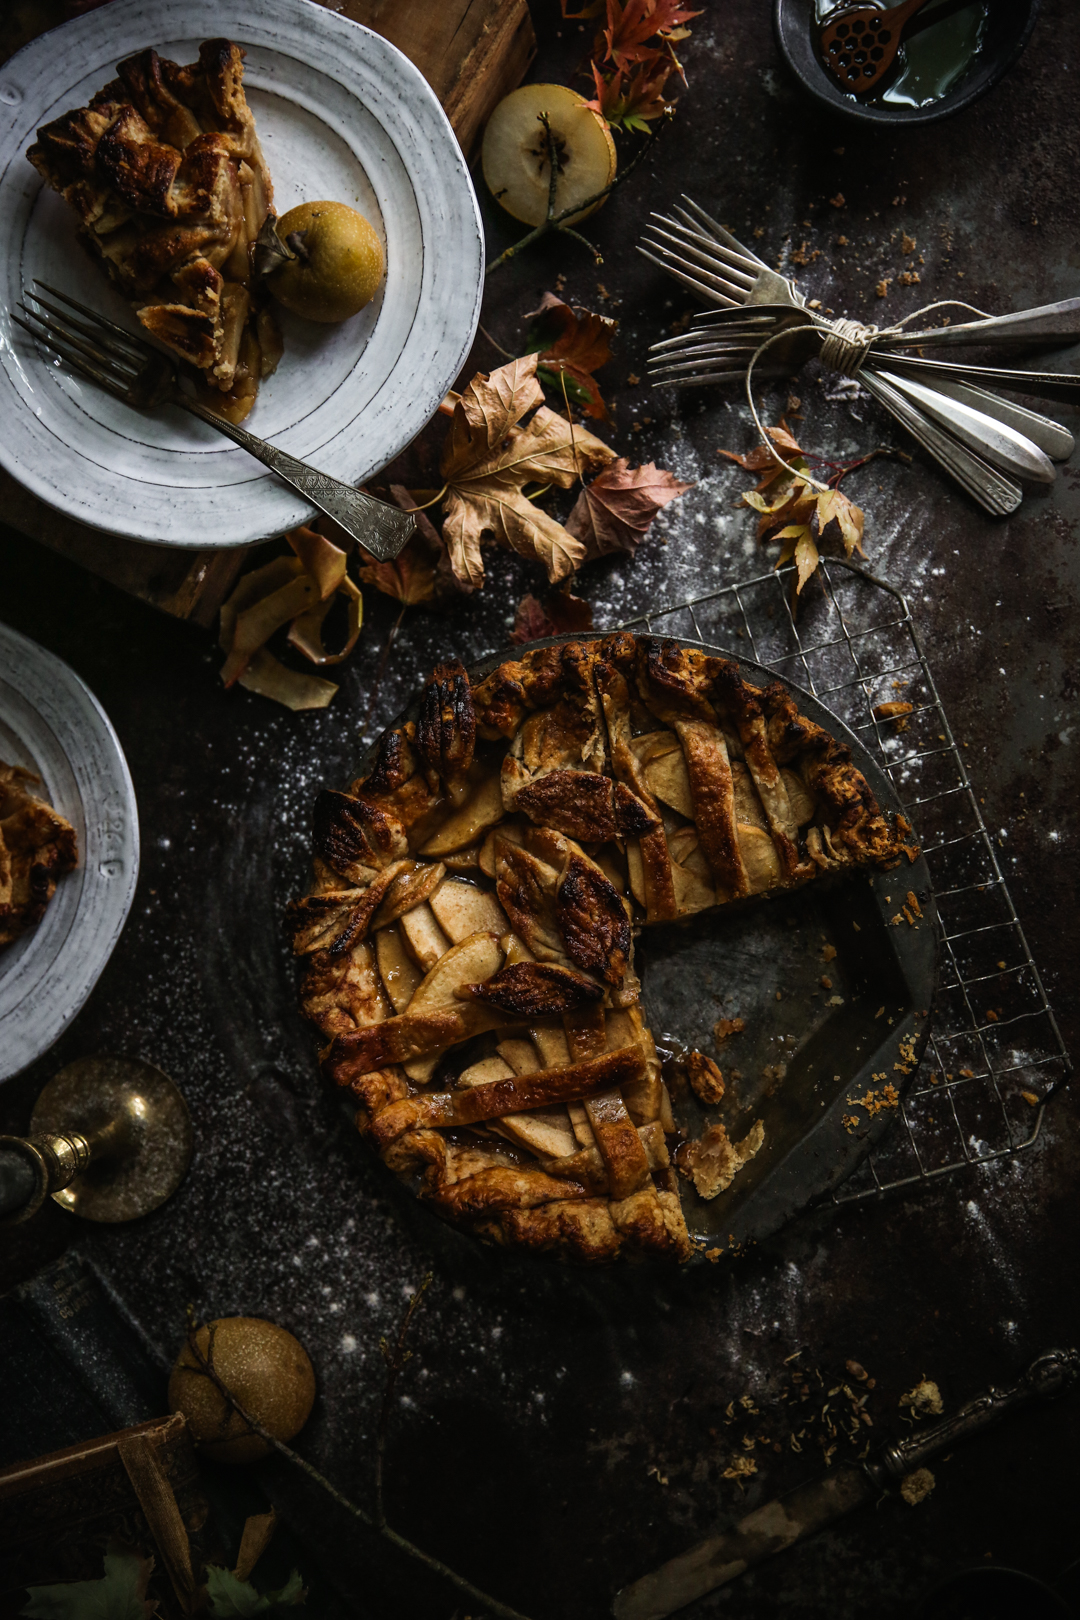 apple-bourbon-pie-photography-recipe-and-styling-by-christiann-koepke-of-christiannkoepke-com